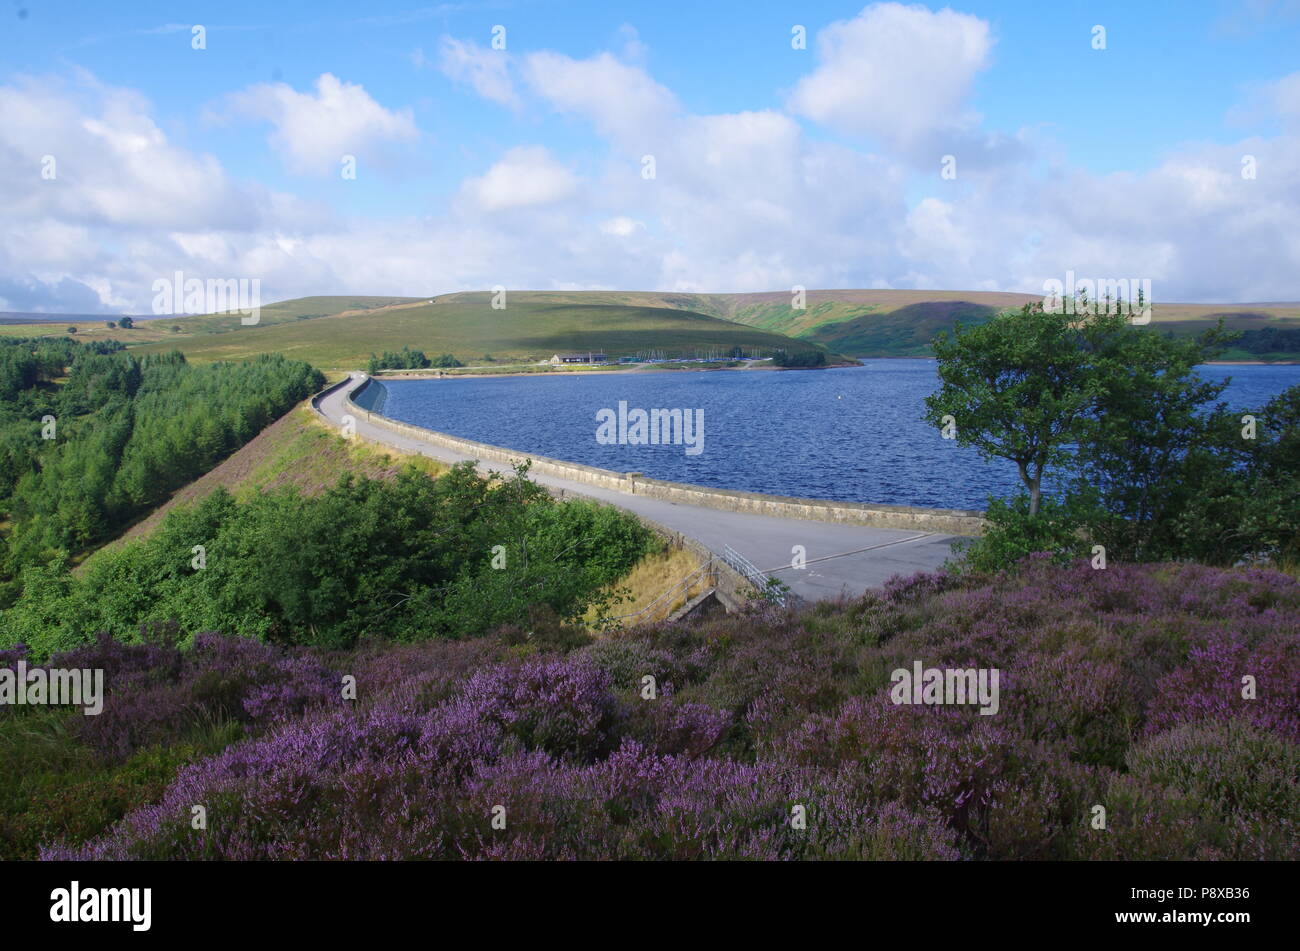 Winscar Reservoir. John o' groats (Duncansby head) to lands end. End to end trail. Dunford Bridge. South Yorkshire. England. UK Stock Photo